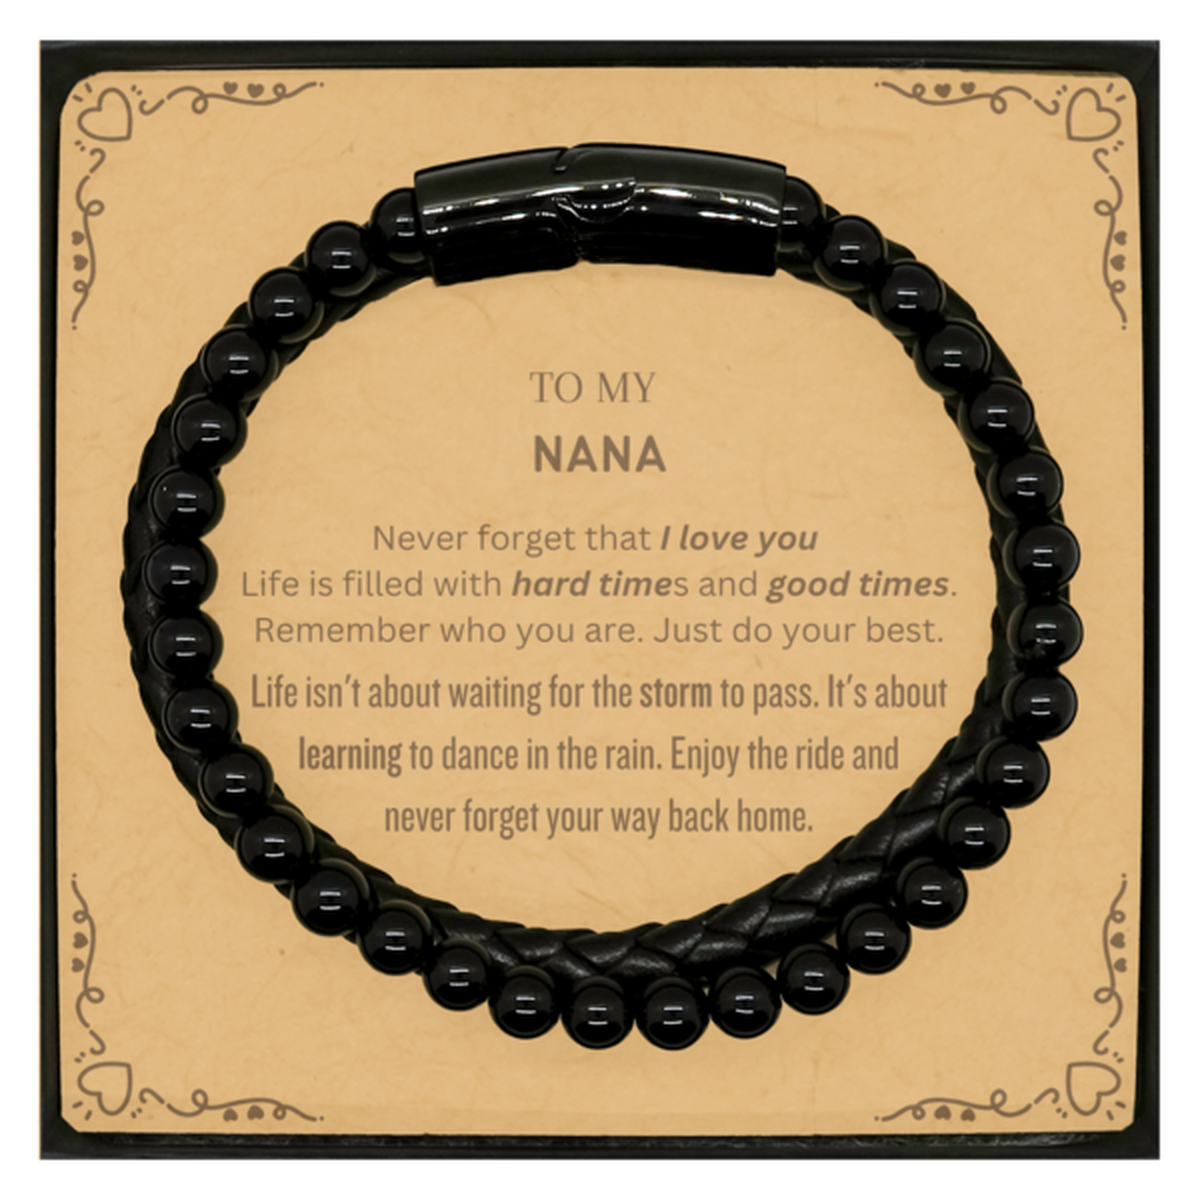 Christmas Nana Stone Leather Bracelets Gifts, To My Nana Birthday Thank You Gifts For Nana, Graduation Unique Gifts For Nana To My Nana Never forget that I love you life is filled with hard times and good times. Remember who you are. Just do your best